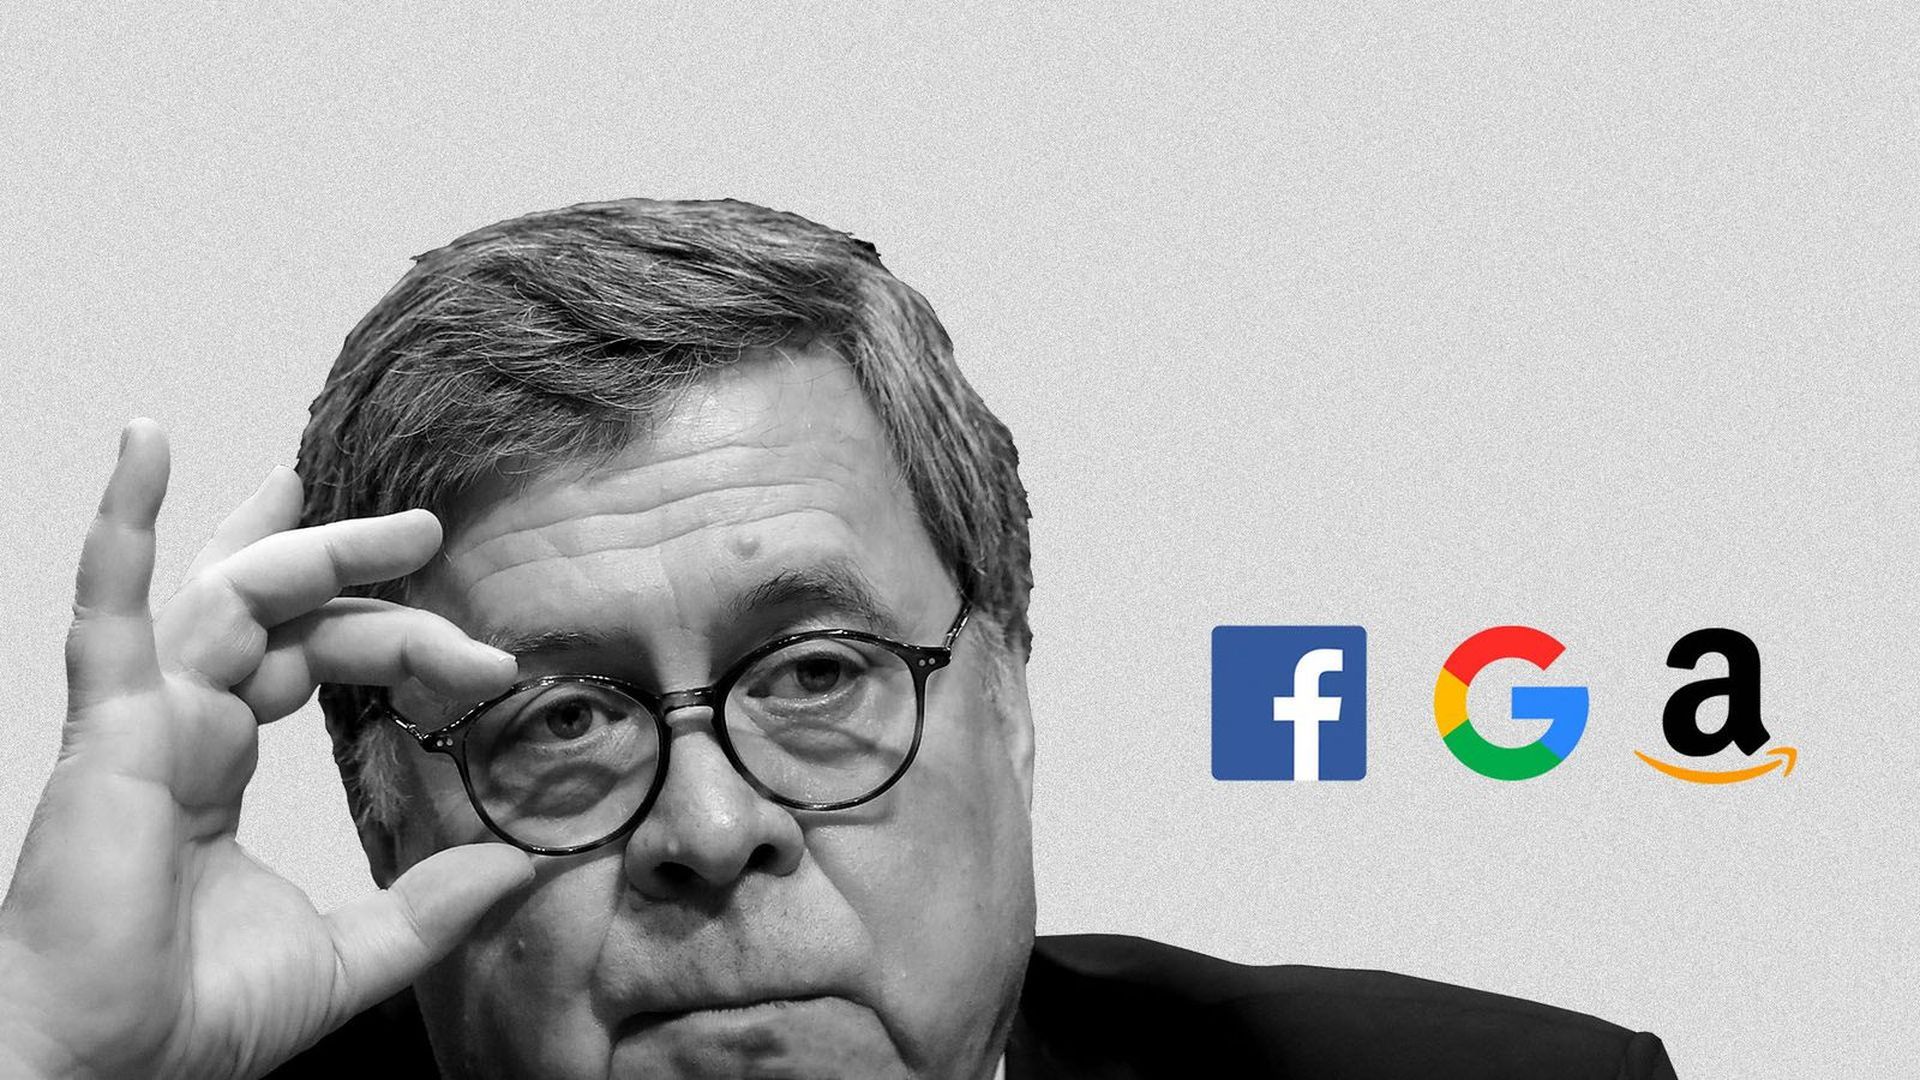 Illustration of Attorney General William Barr eyeing logos of Facebook, Google, and Amazon